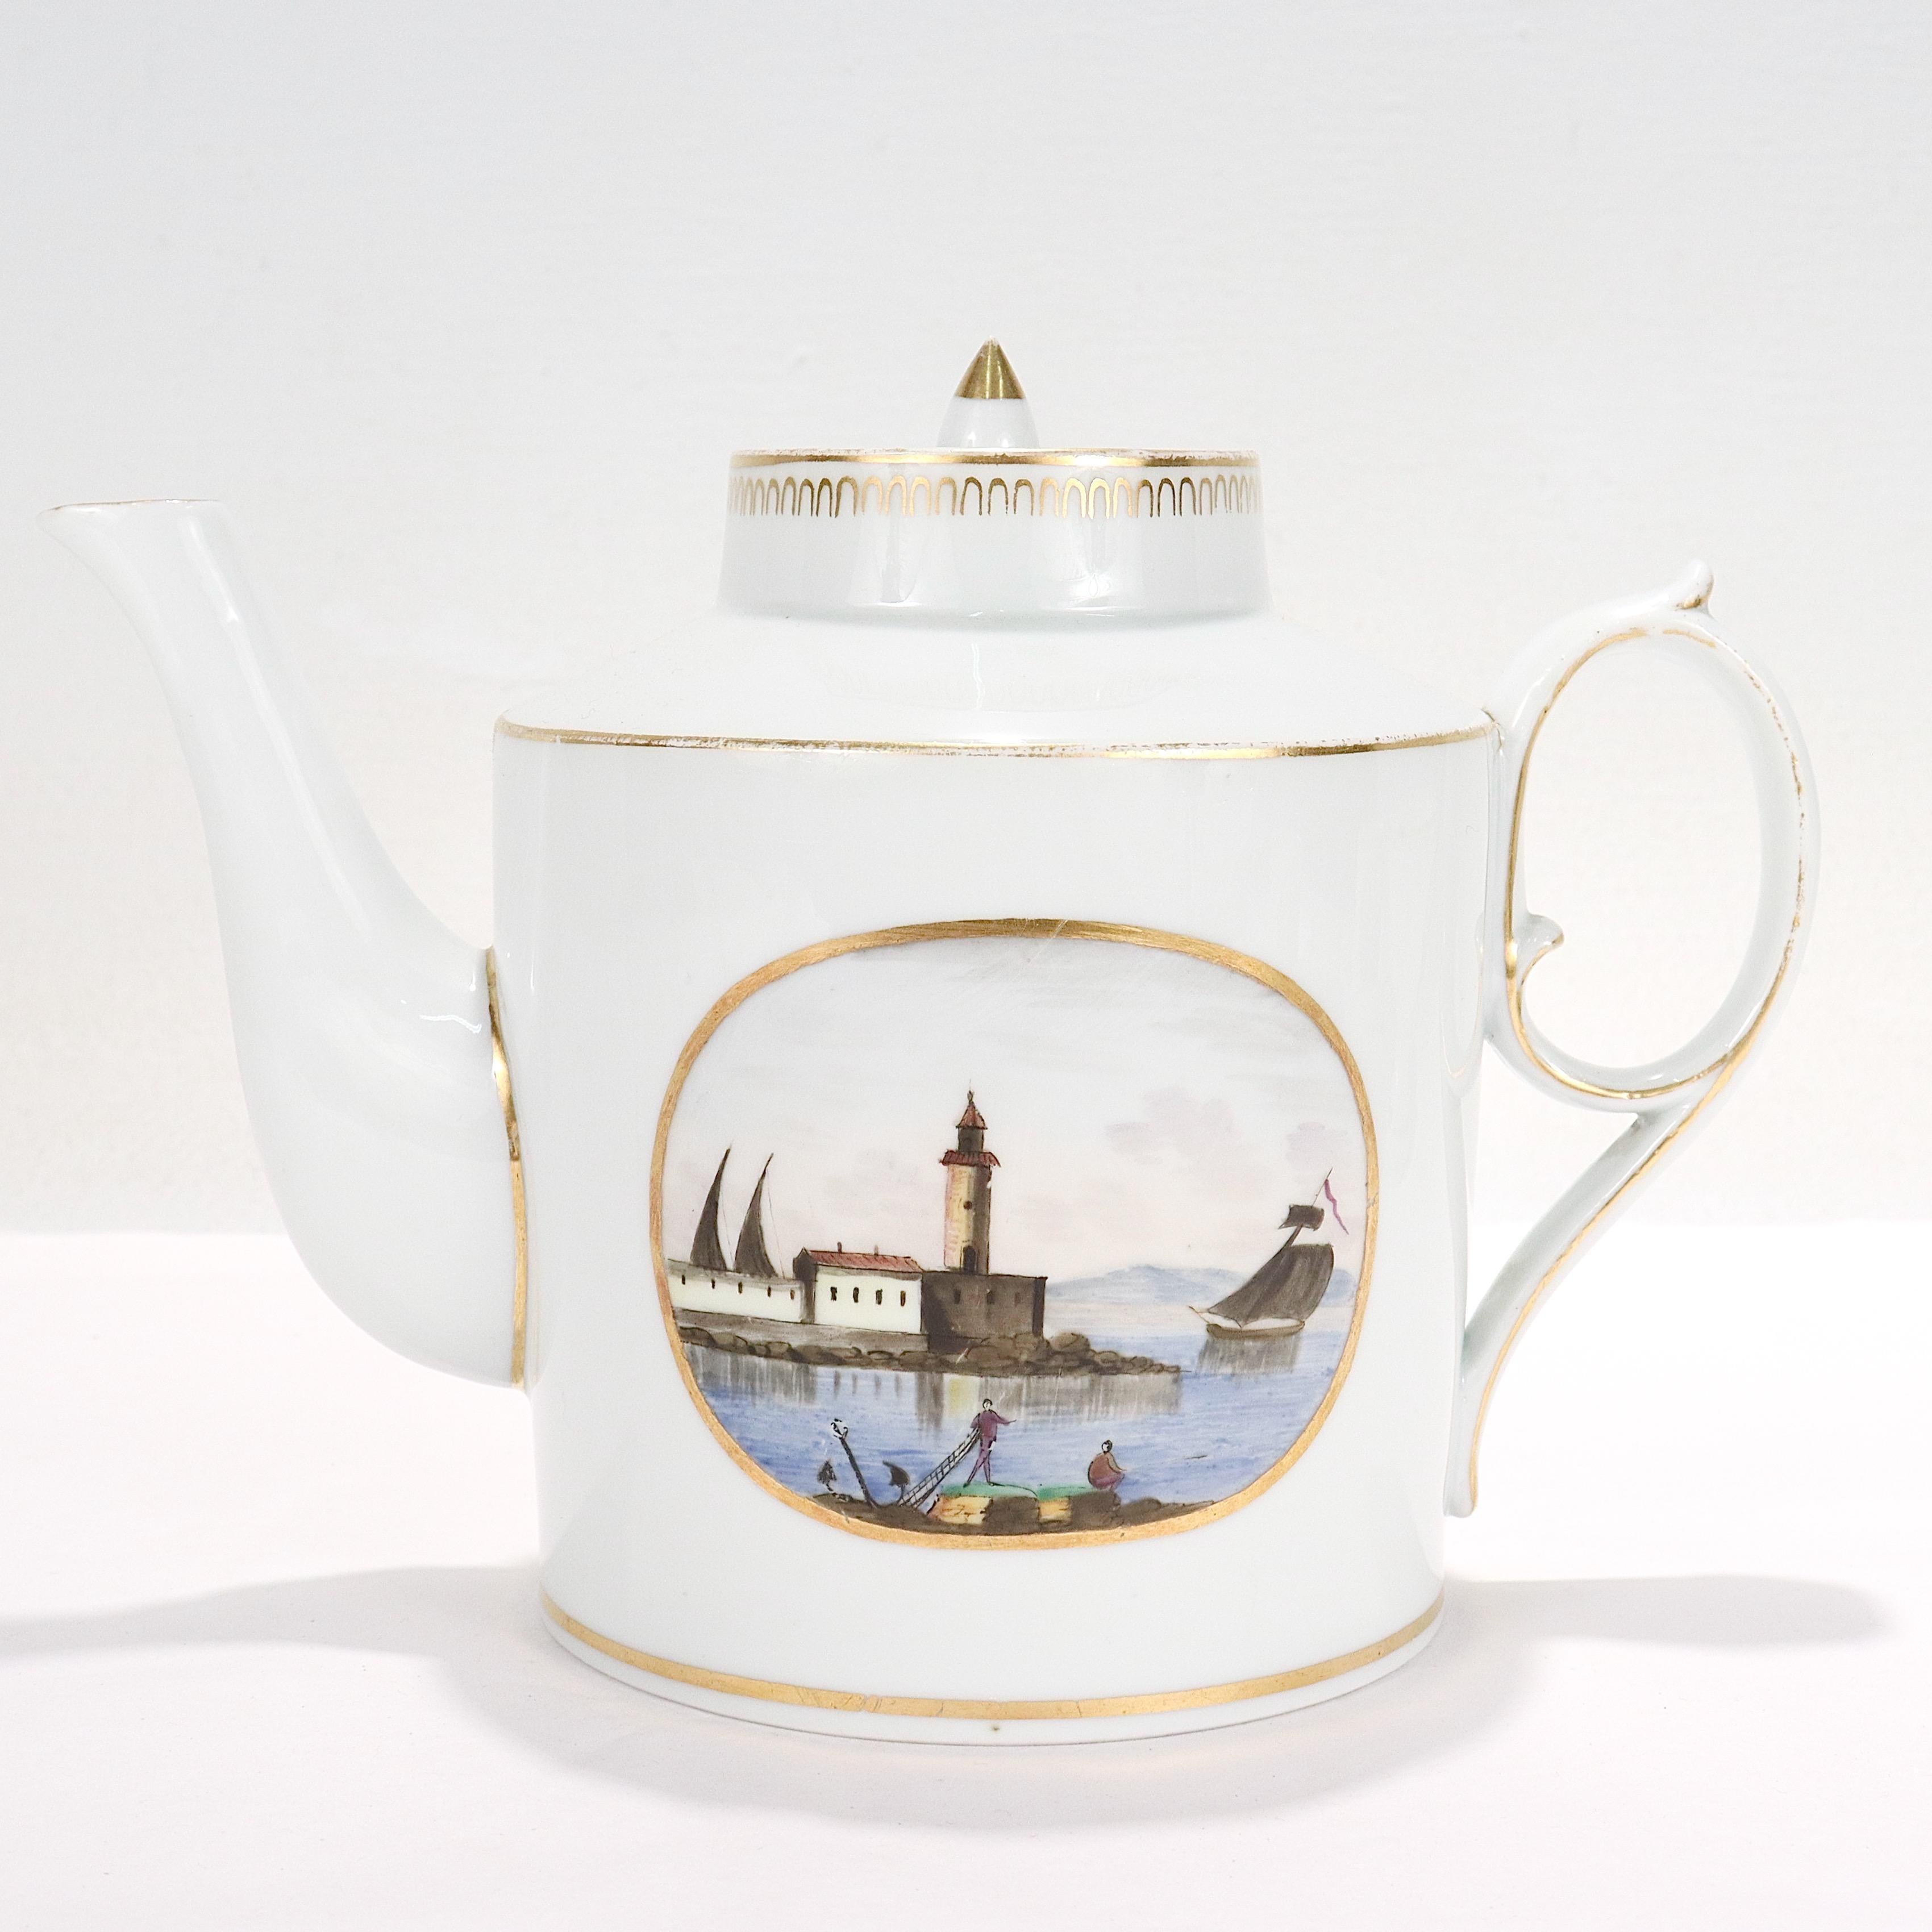 A fine antique topographical porcelain teapot.

By Doccia Porcelain Manufactory circa 1820.

With painted enamel topographical scenes: each side of the teapot depicting an unnamed harbor scene.

Decorated in polychrome enamels and gilt borders